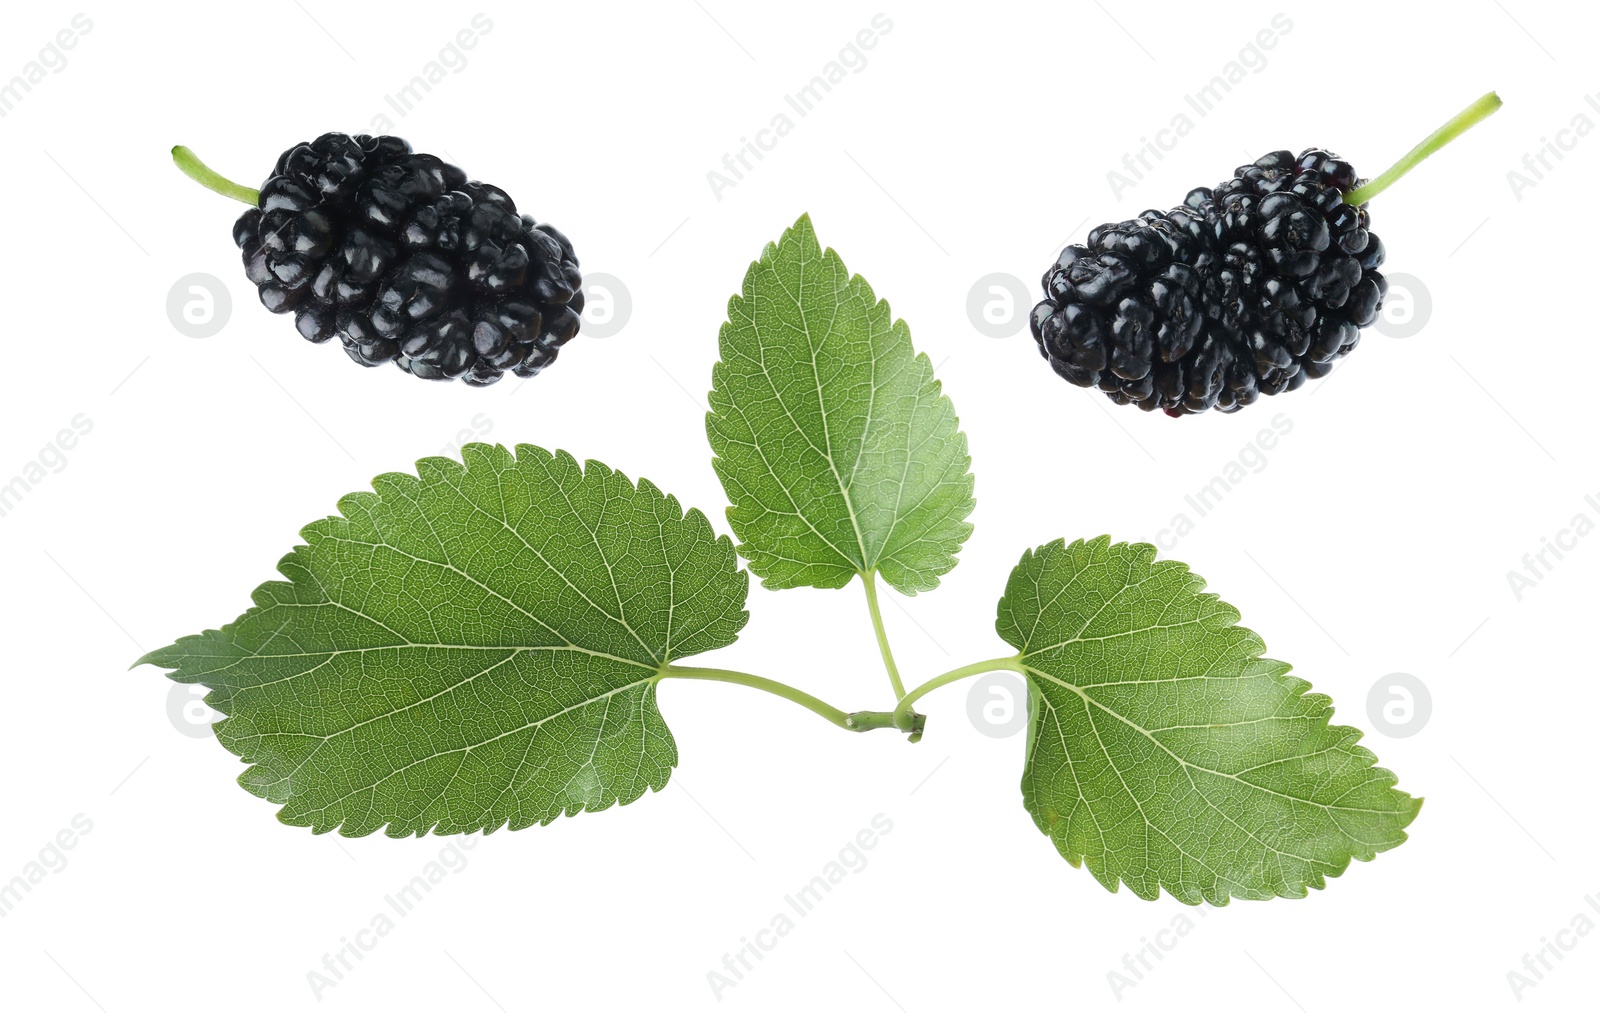 Image of Fresh ripe black mulberries and leaves on white background